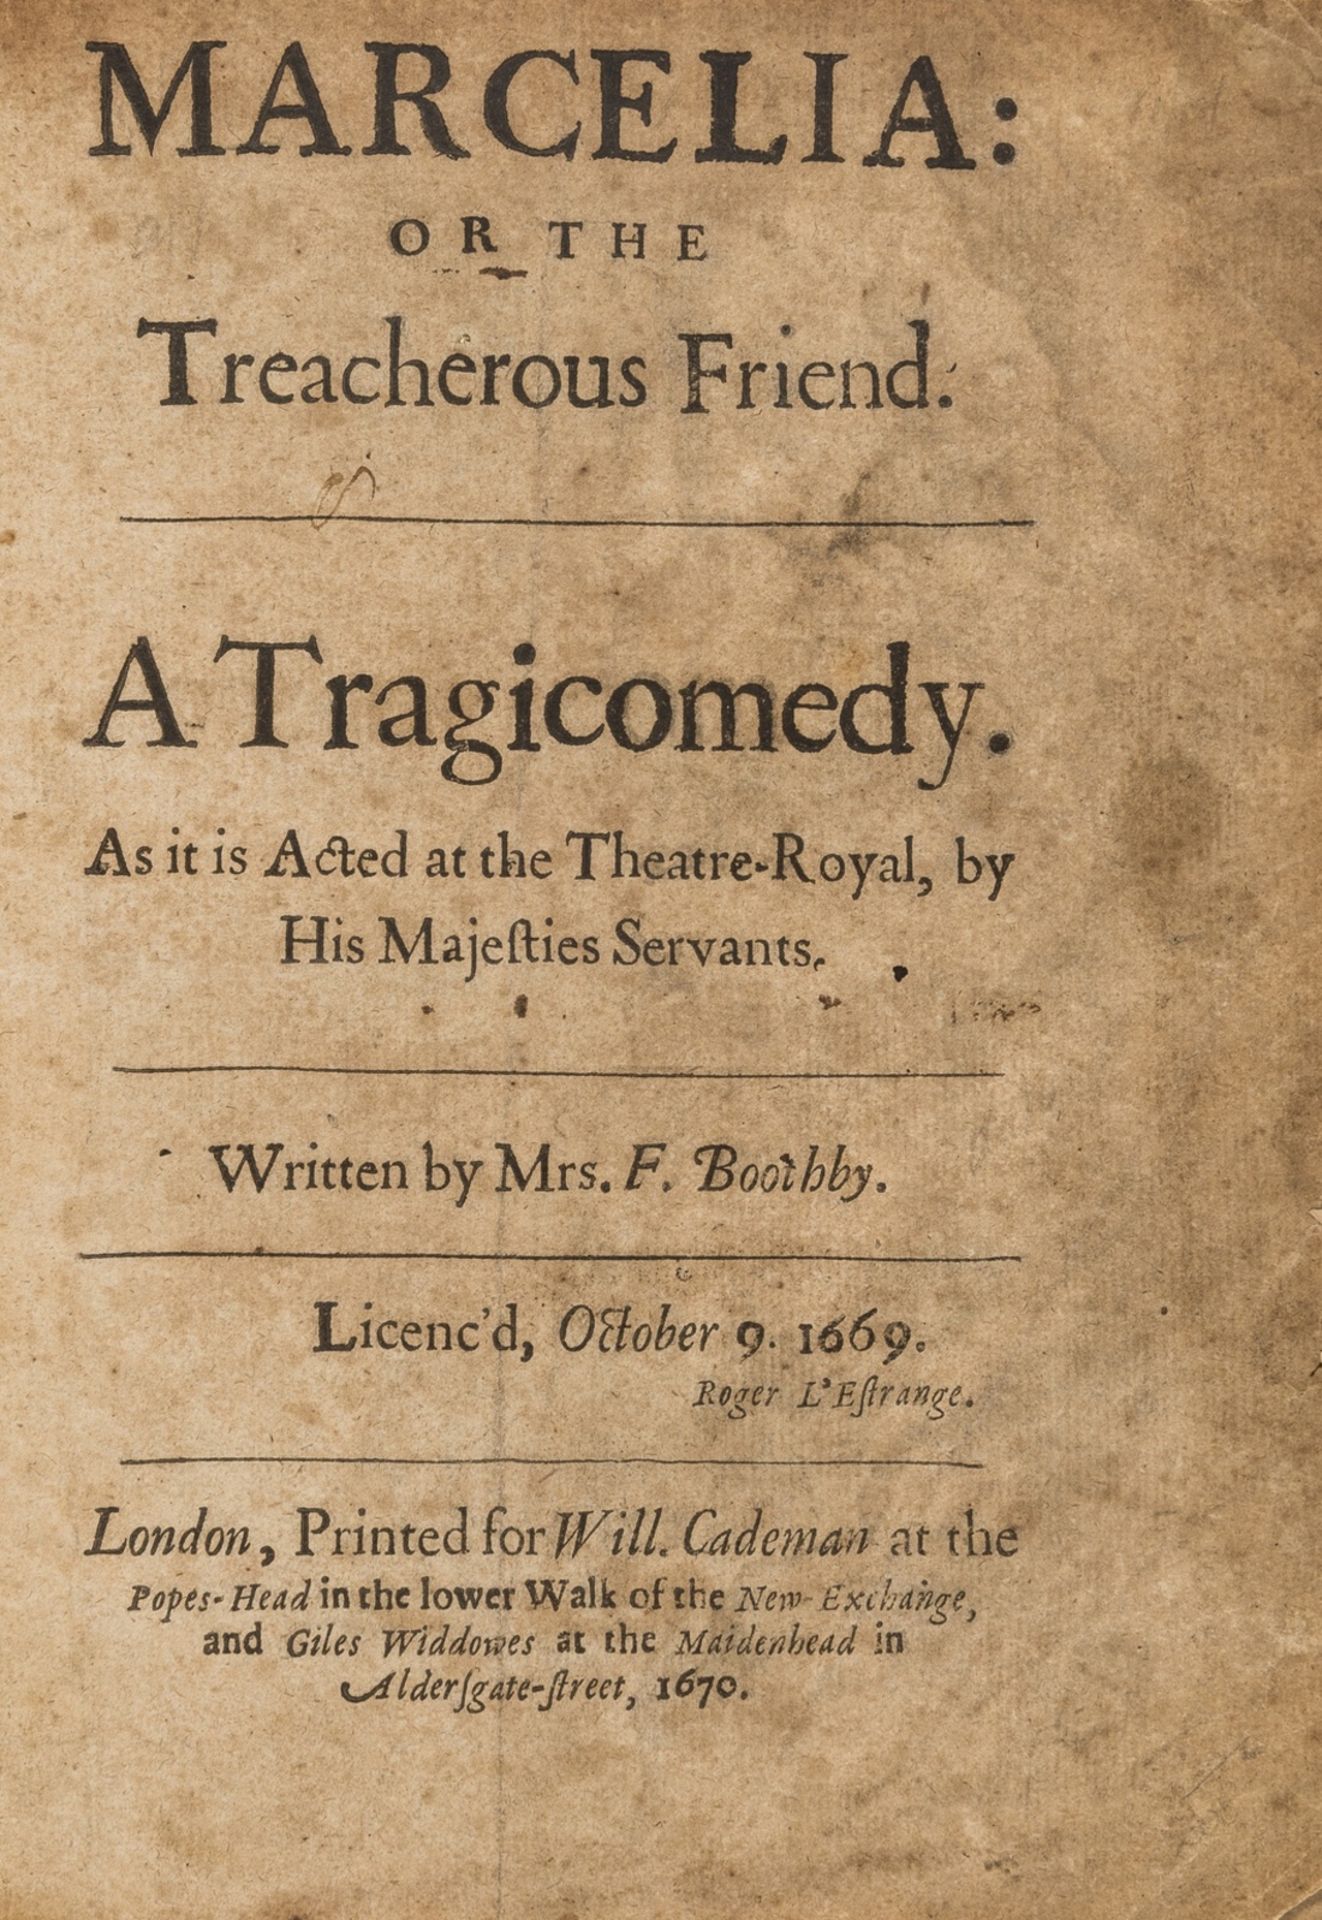 Boothby (Francis) Marcelia : or the Treacherous Friend, first edition, 1670.